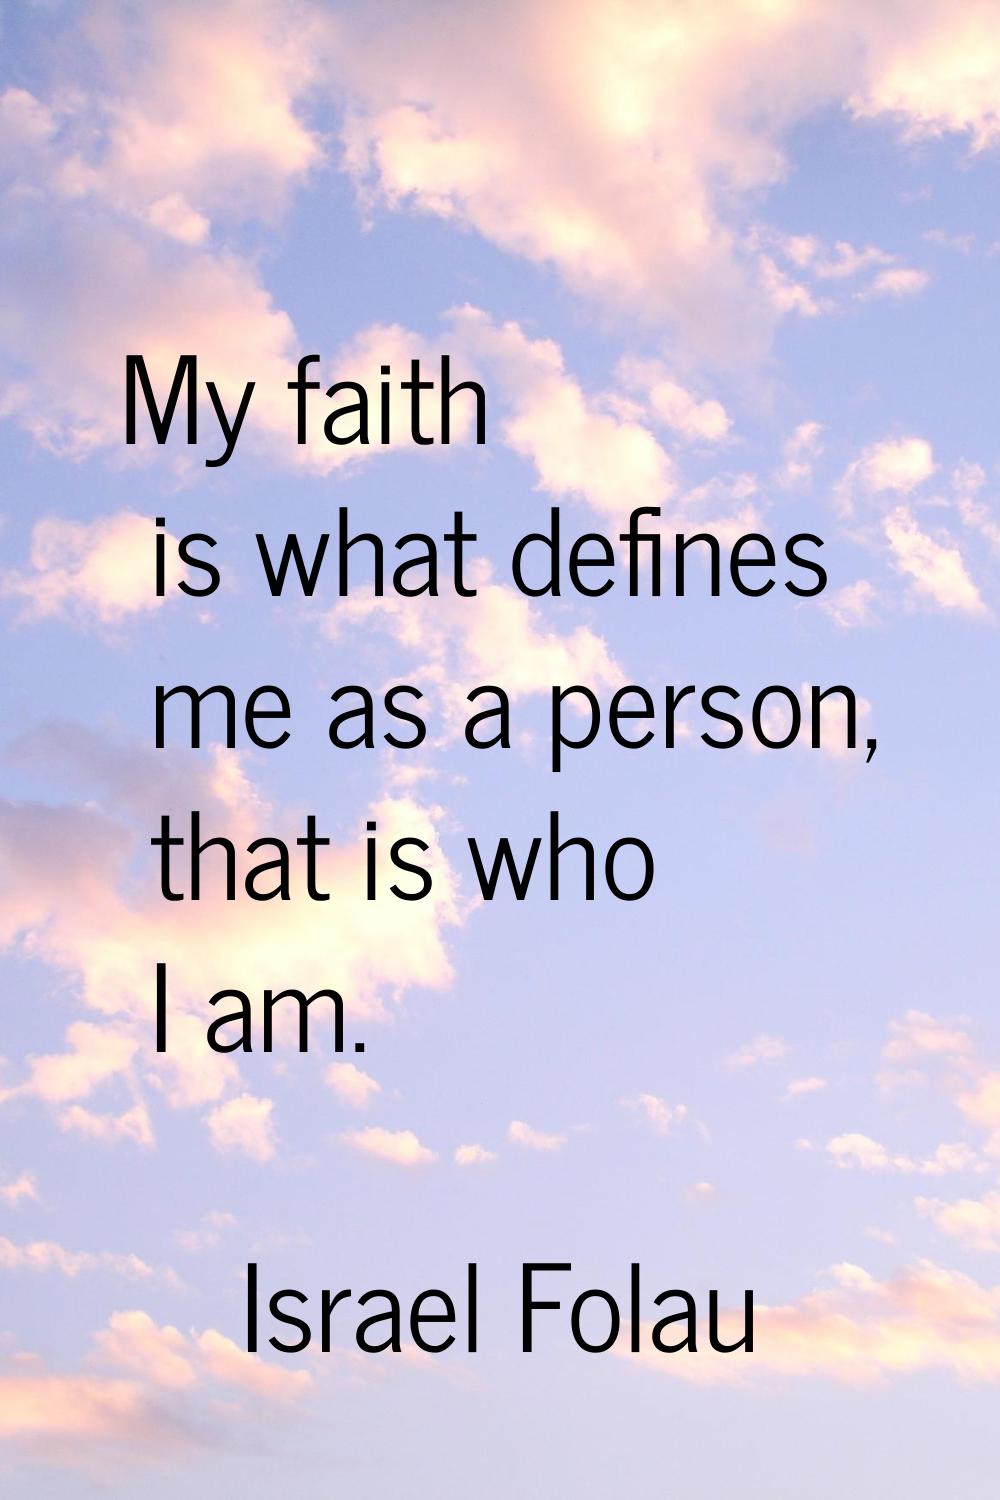 My faith is what defines me as a person, that is who I am.